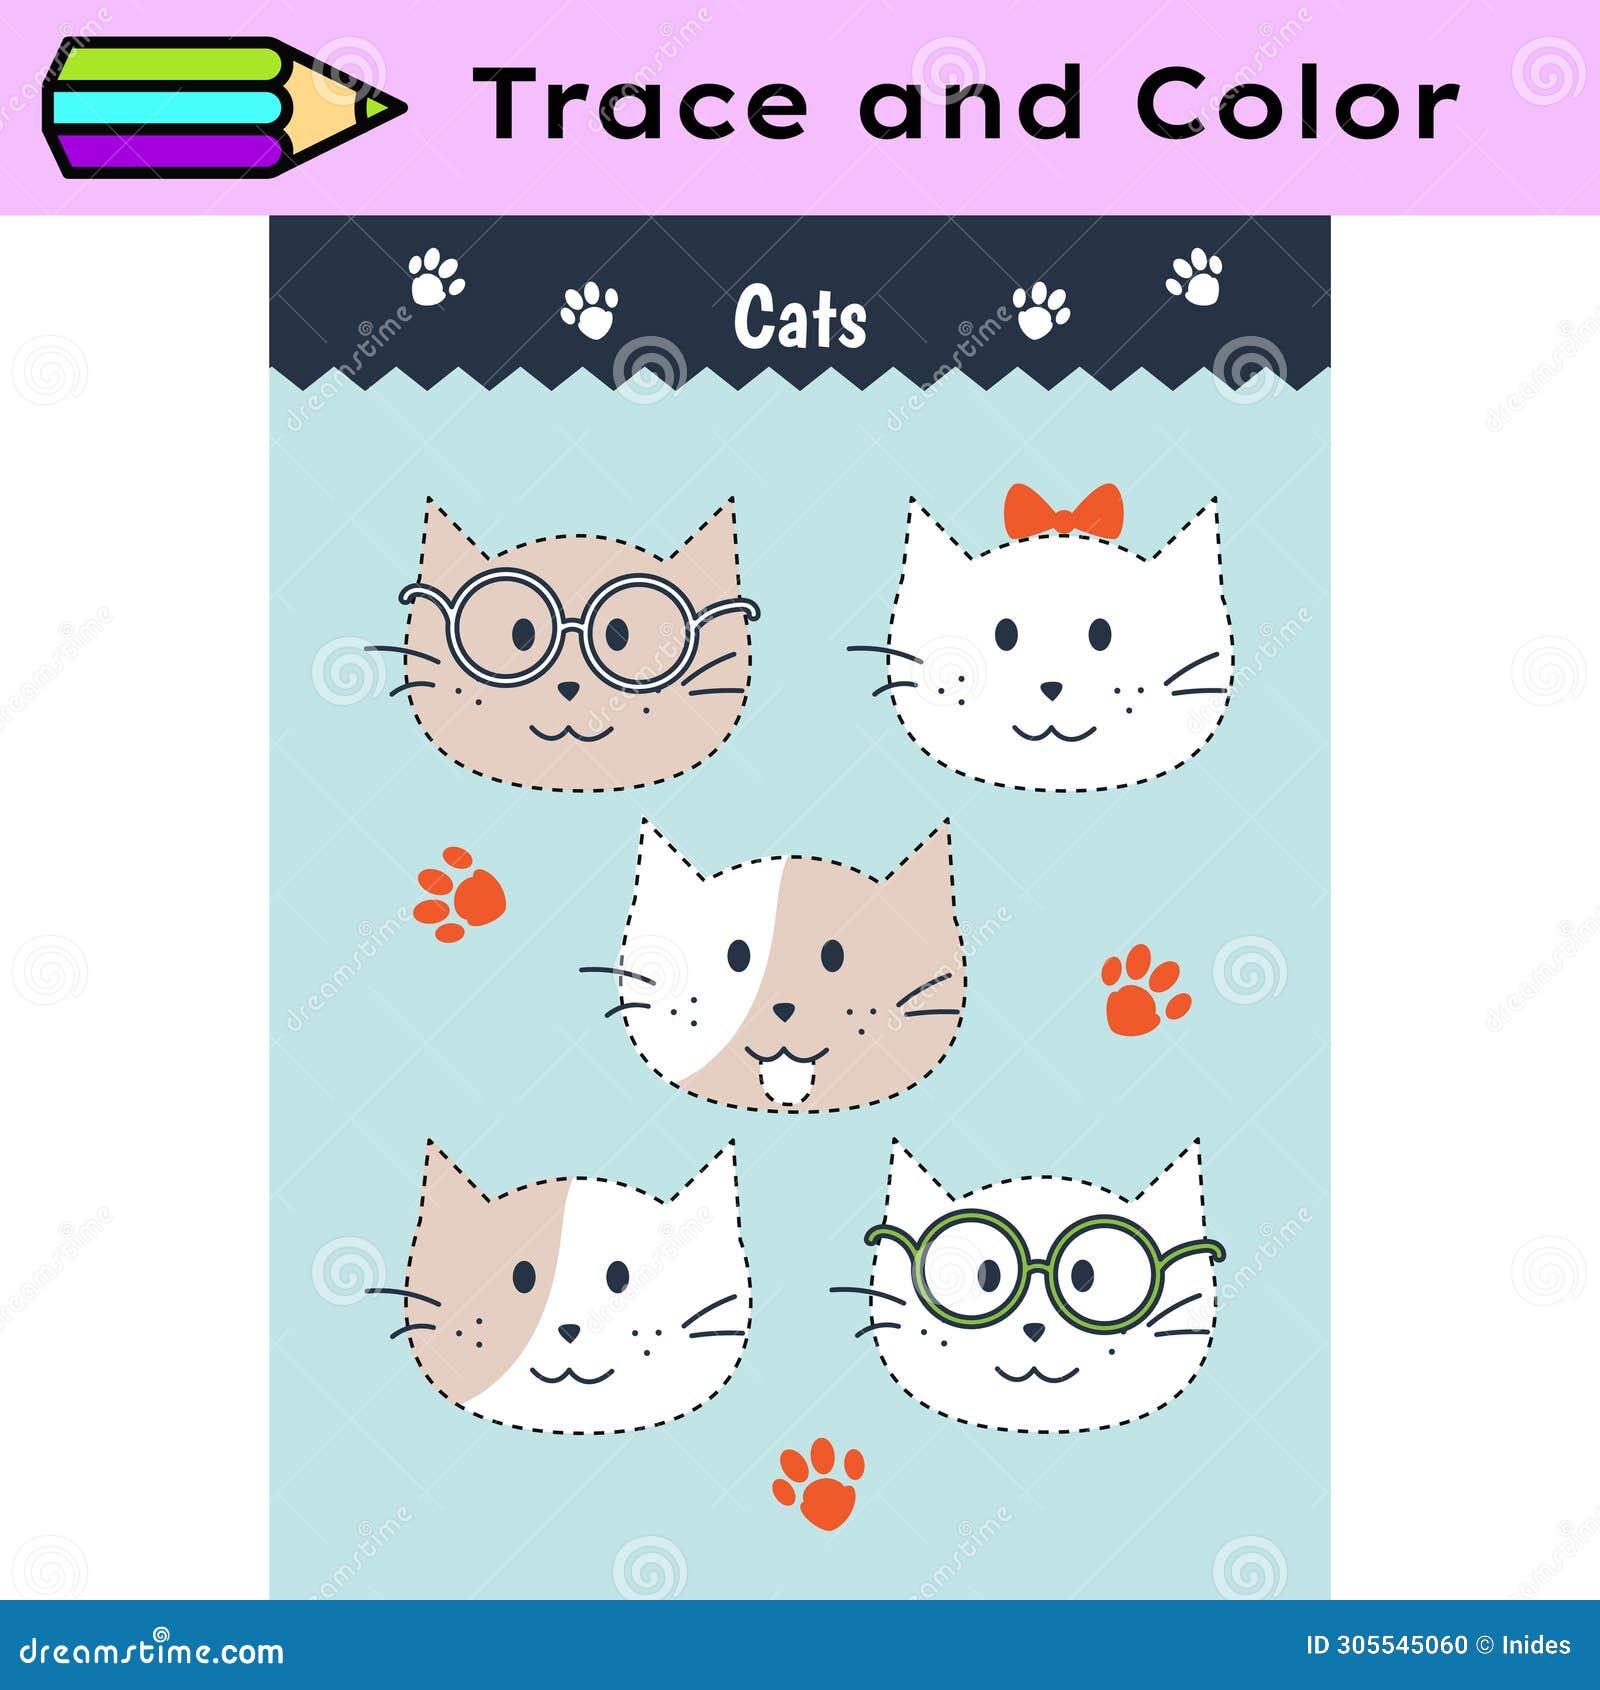 pen tracing lines activity worksheet for children. pencil control for kids practicing motoric skills. kitties